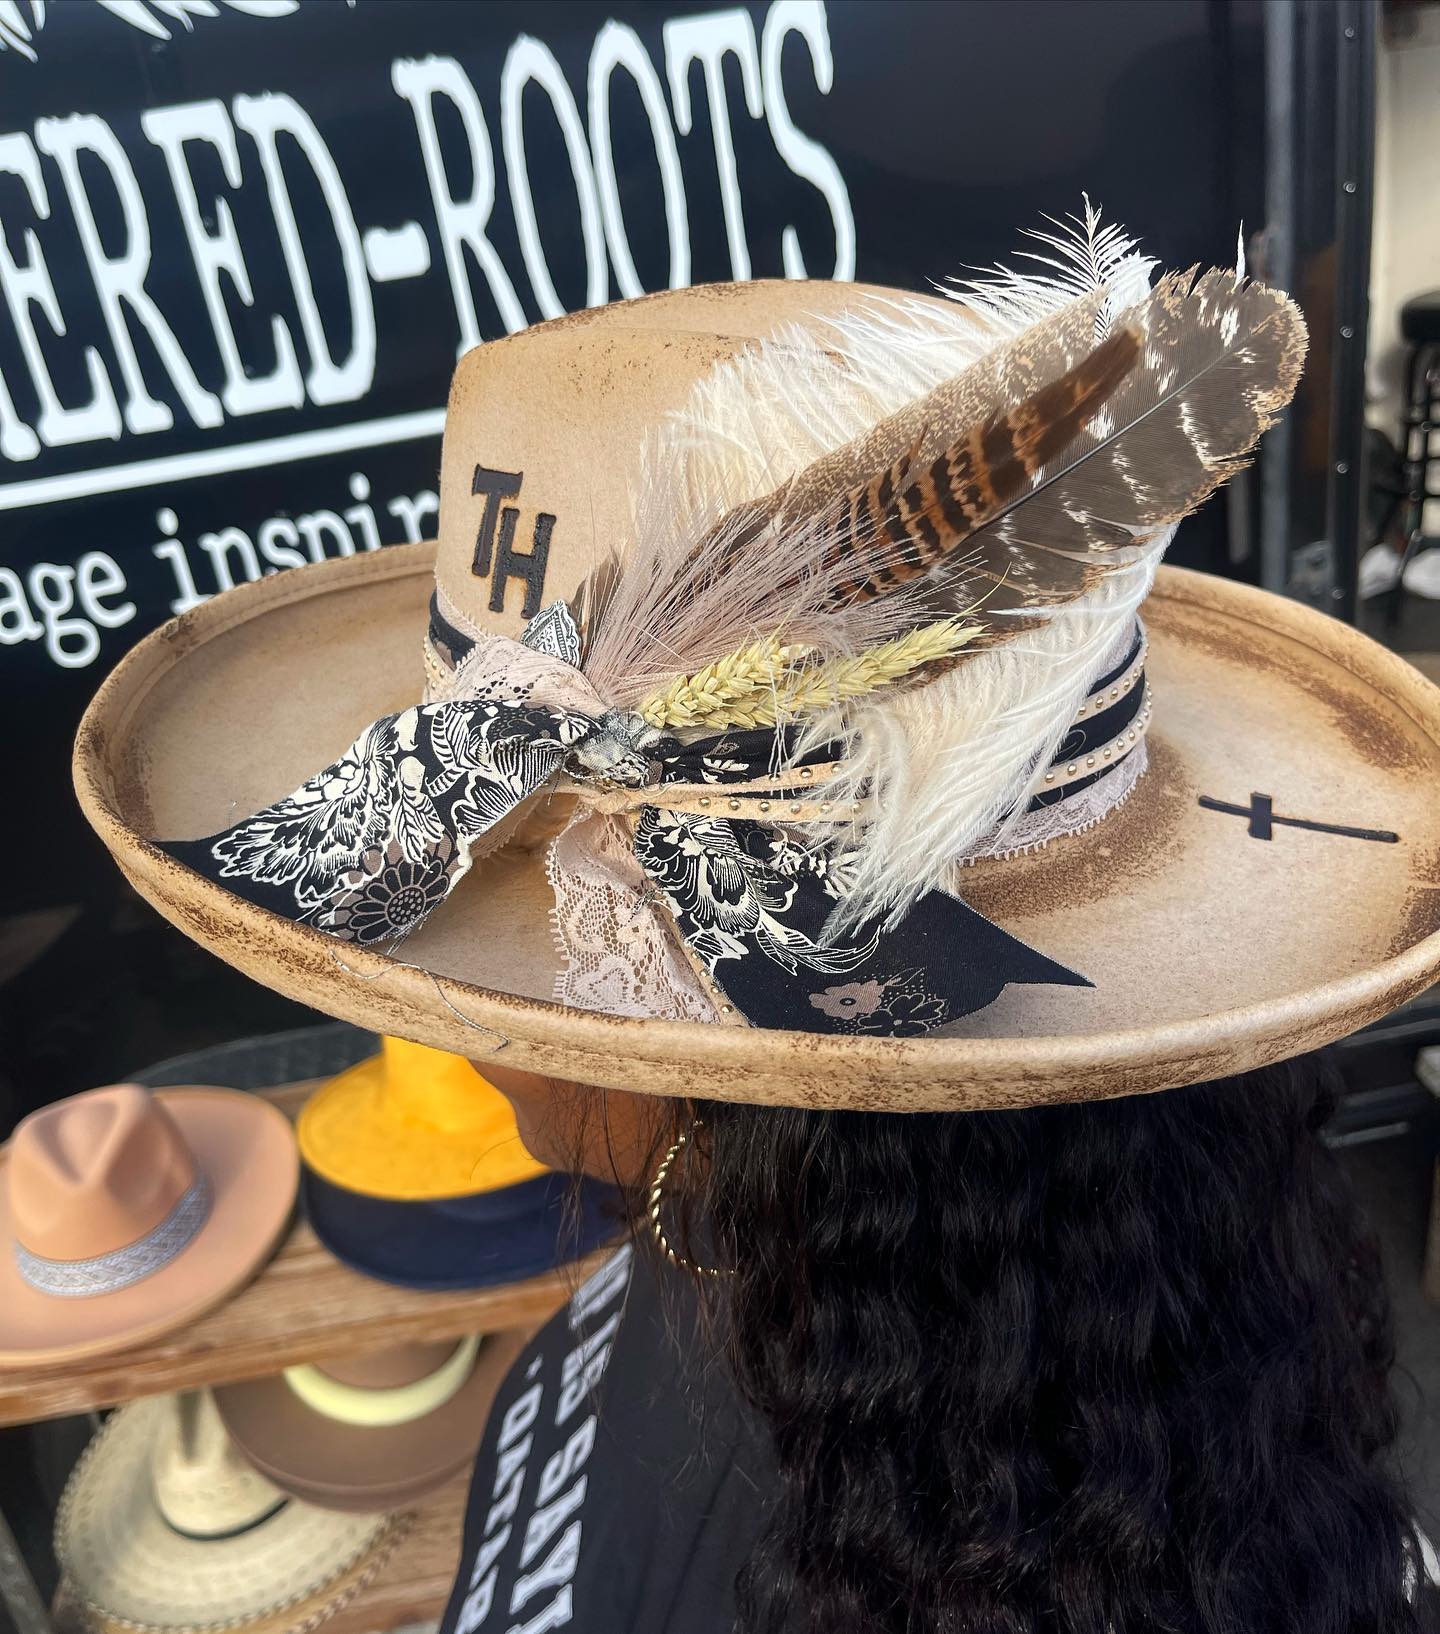 Feathered-Roots Hat Bar & Boutique